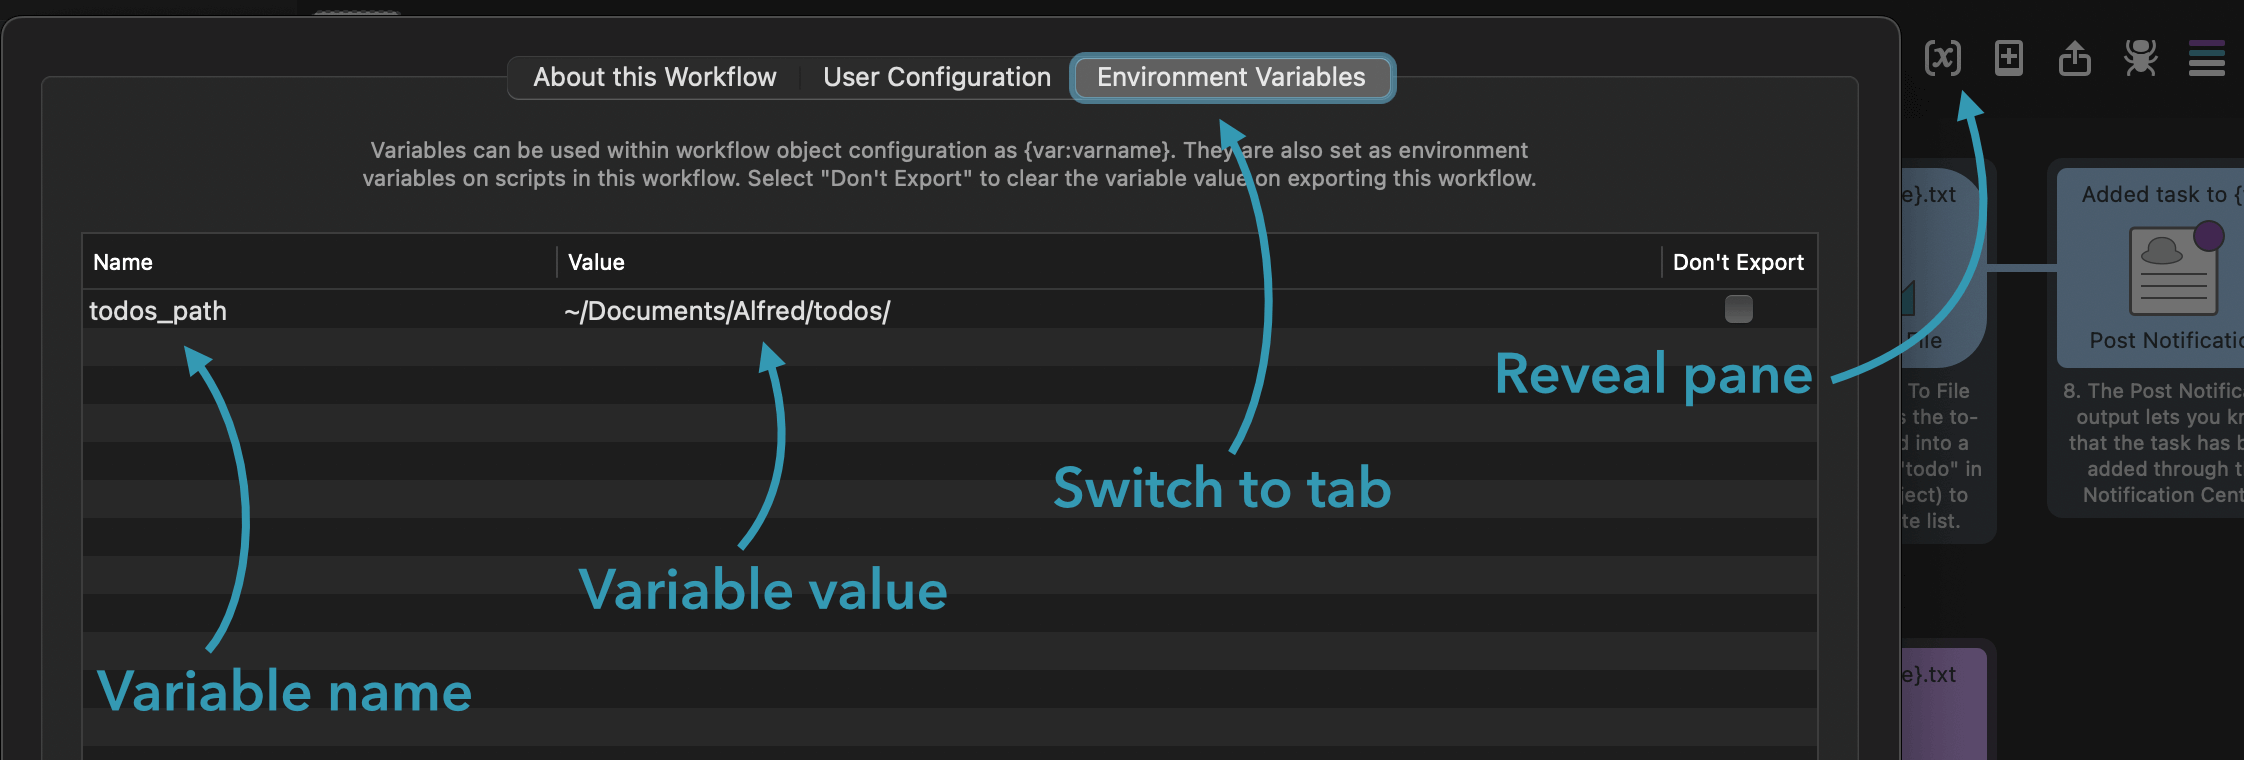 workflow-environment-variables.png